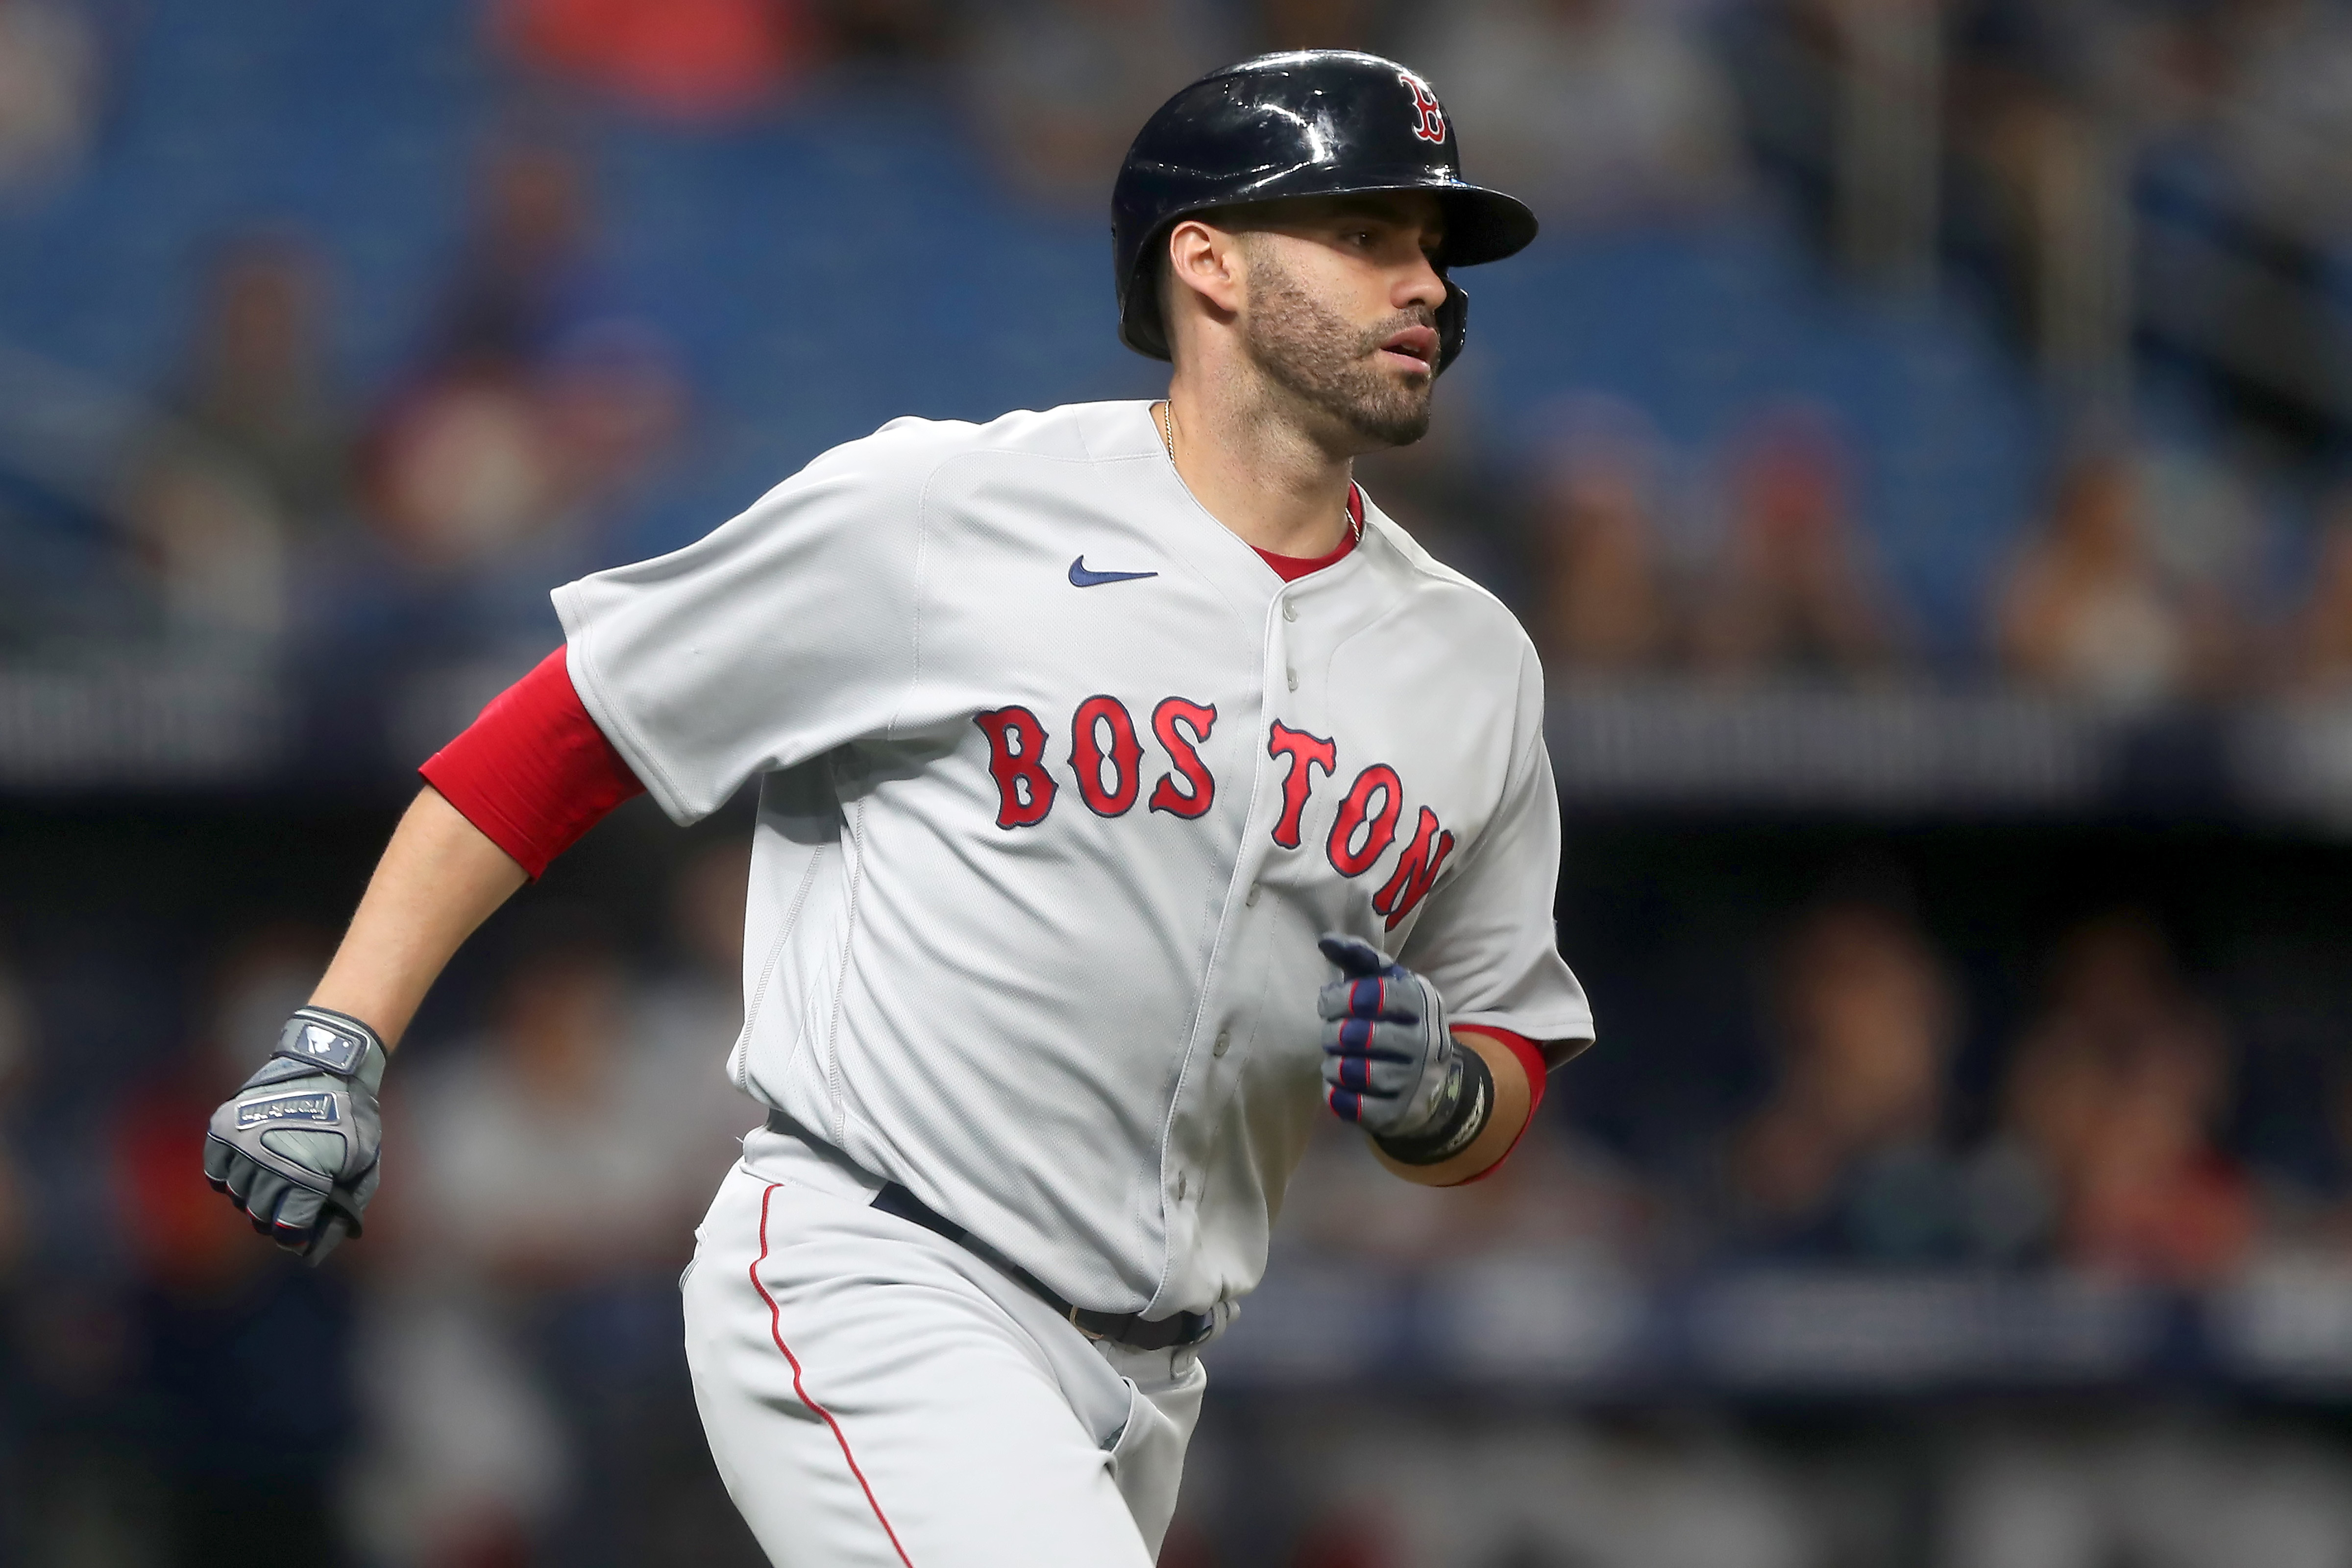 J.D. Martinez crushes a three-run bomb for first hit as a D-back